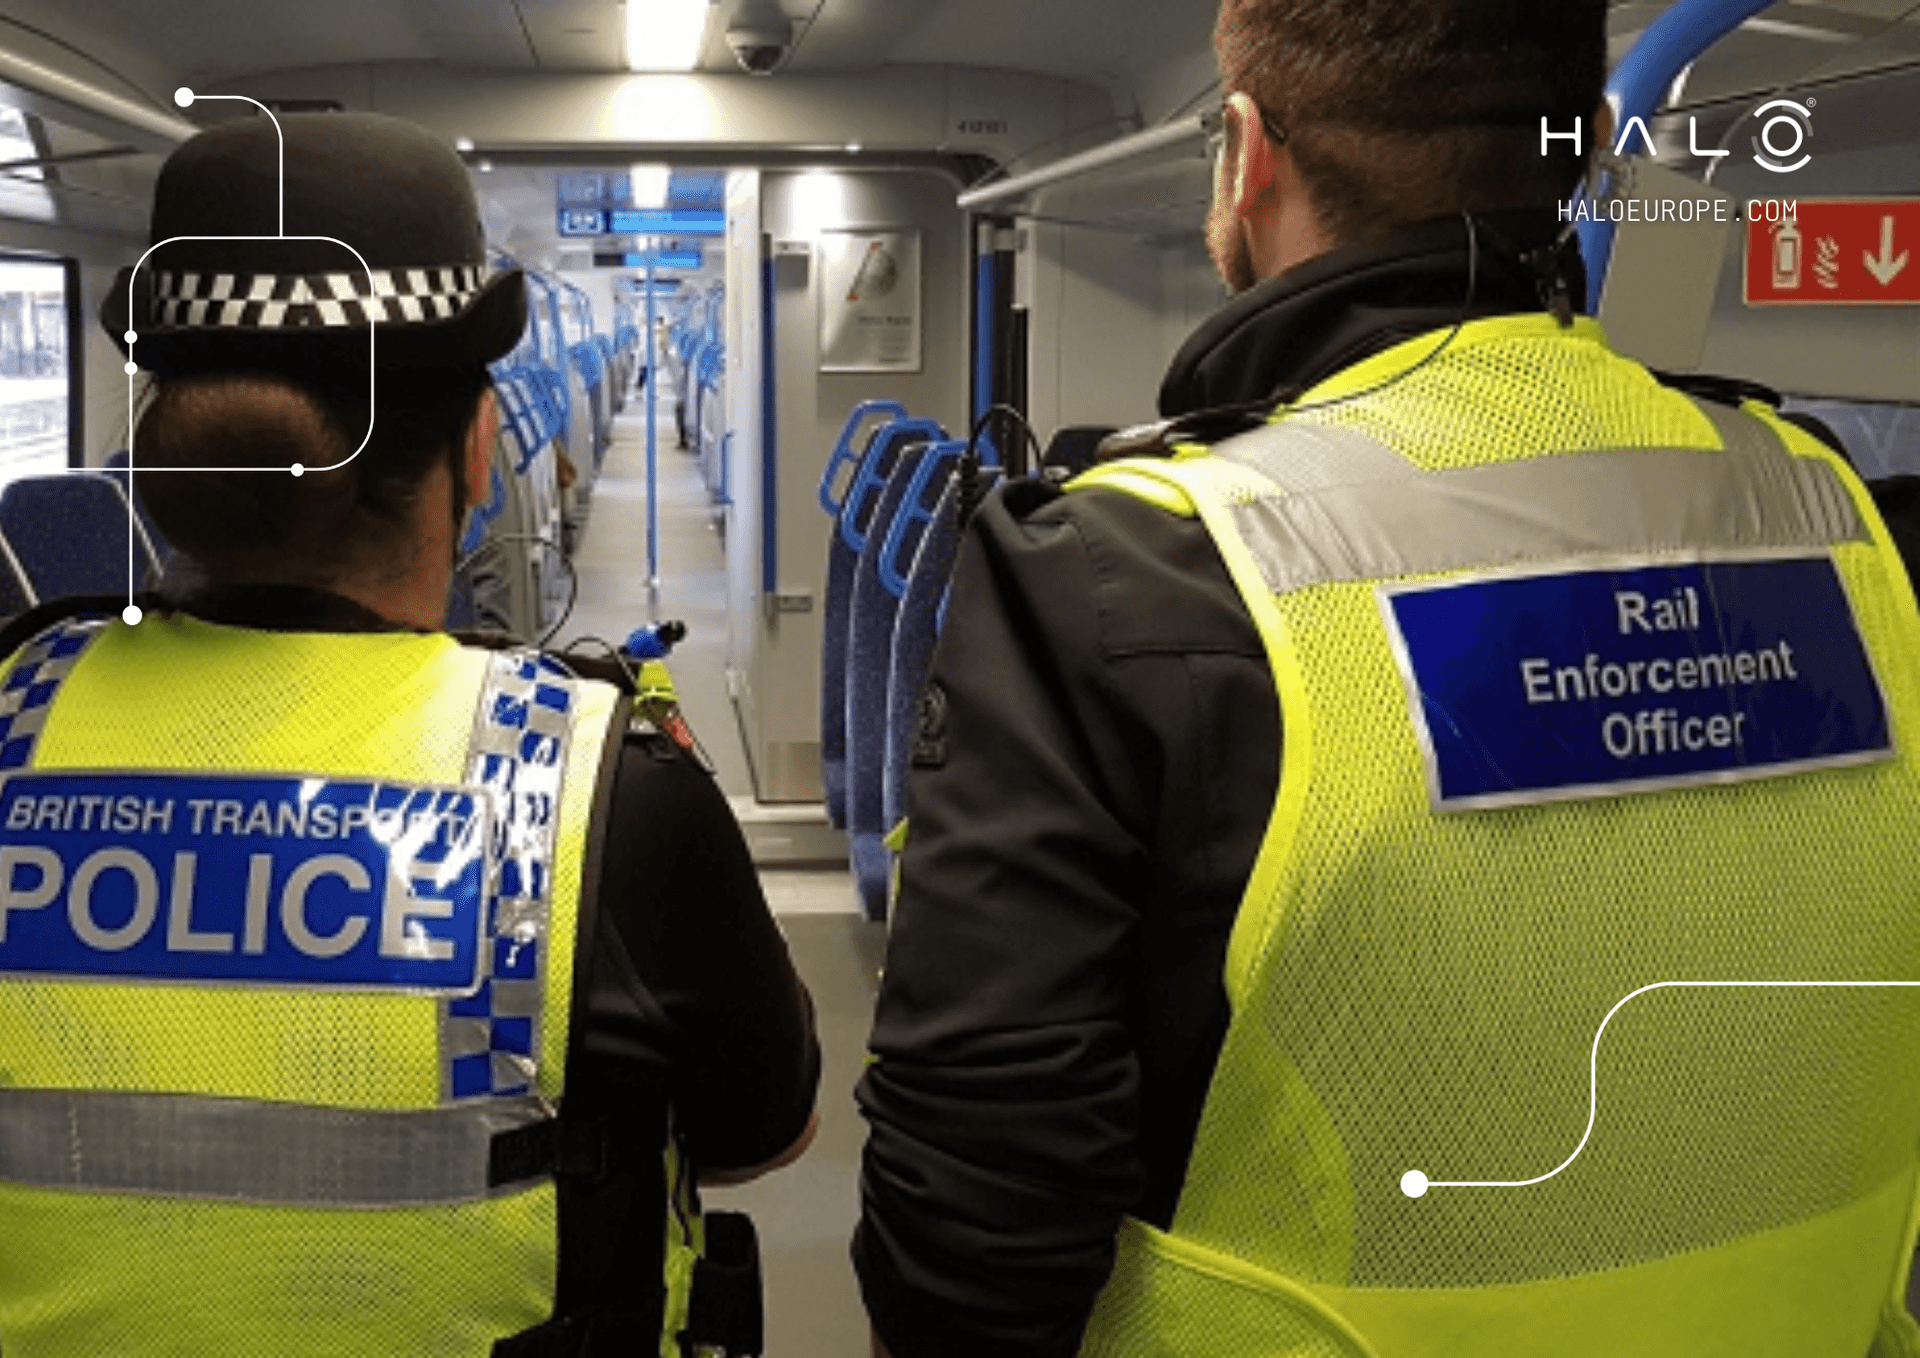 BODY CAMERAS AND PUBLIC SAFETY ON BRITAIN'S RAILWAYS